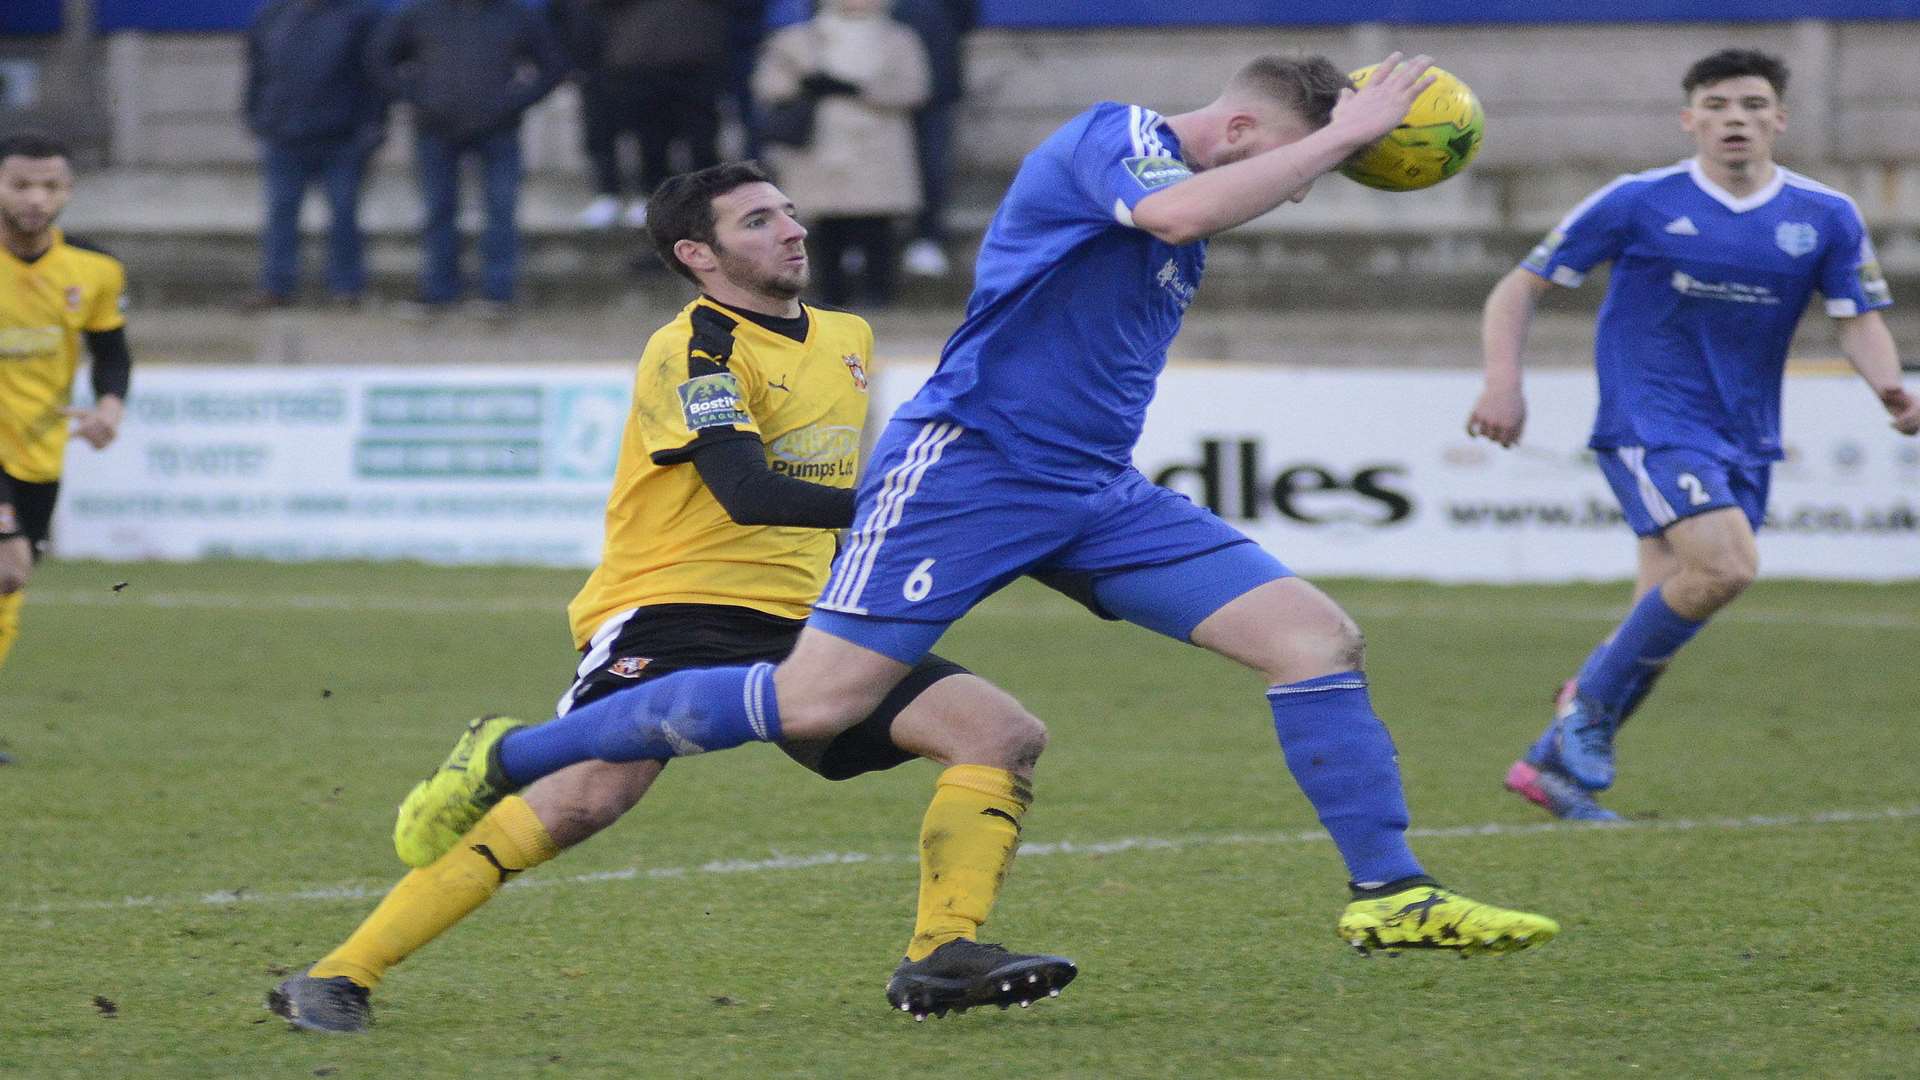 Ian Draycott challenges for the ball against Brightlingsea Picture: Paul Amos